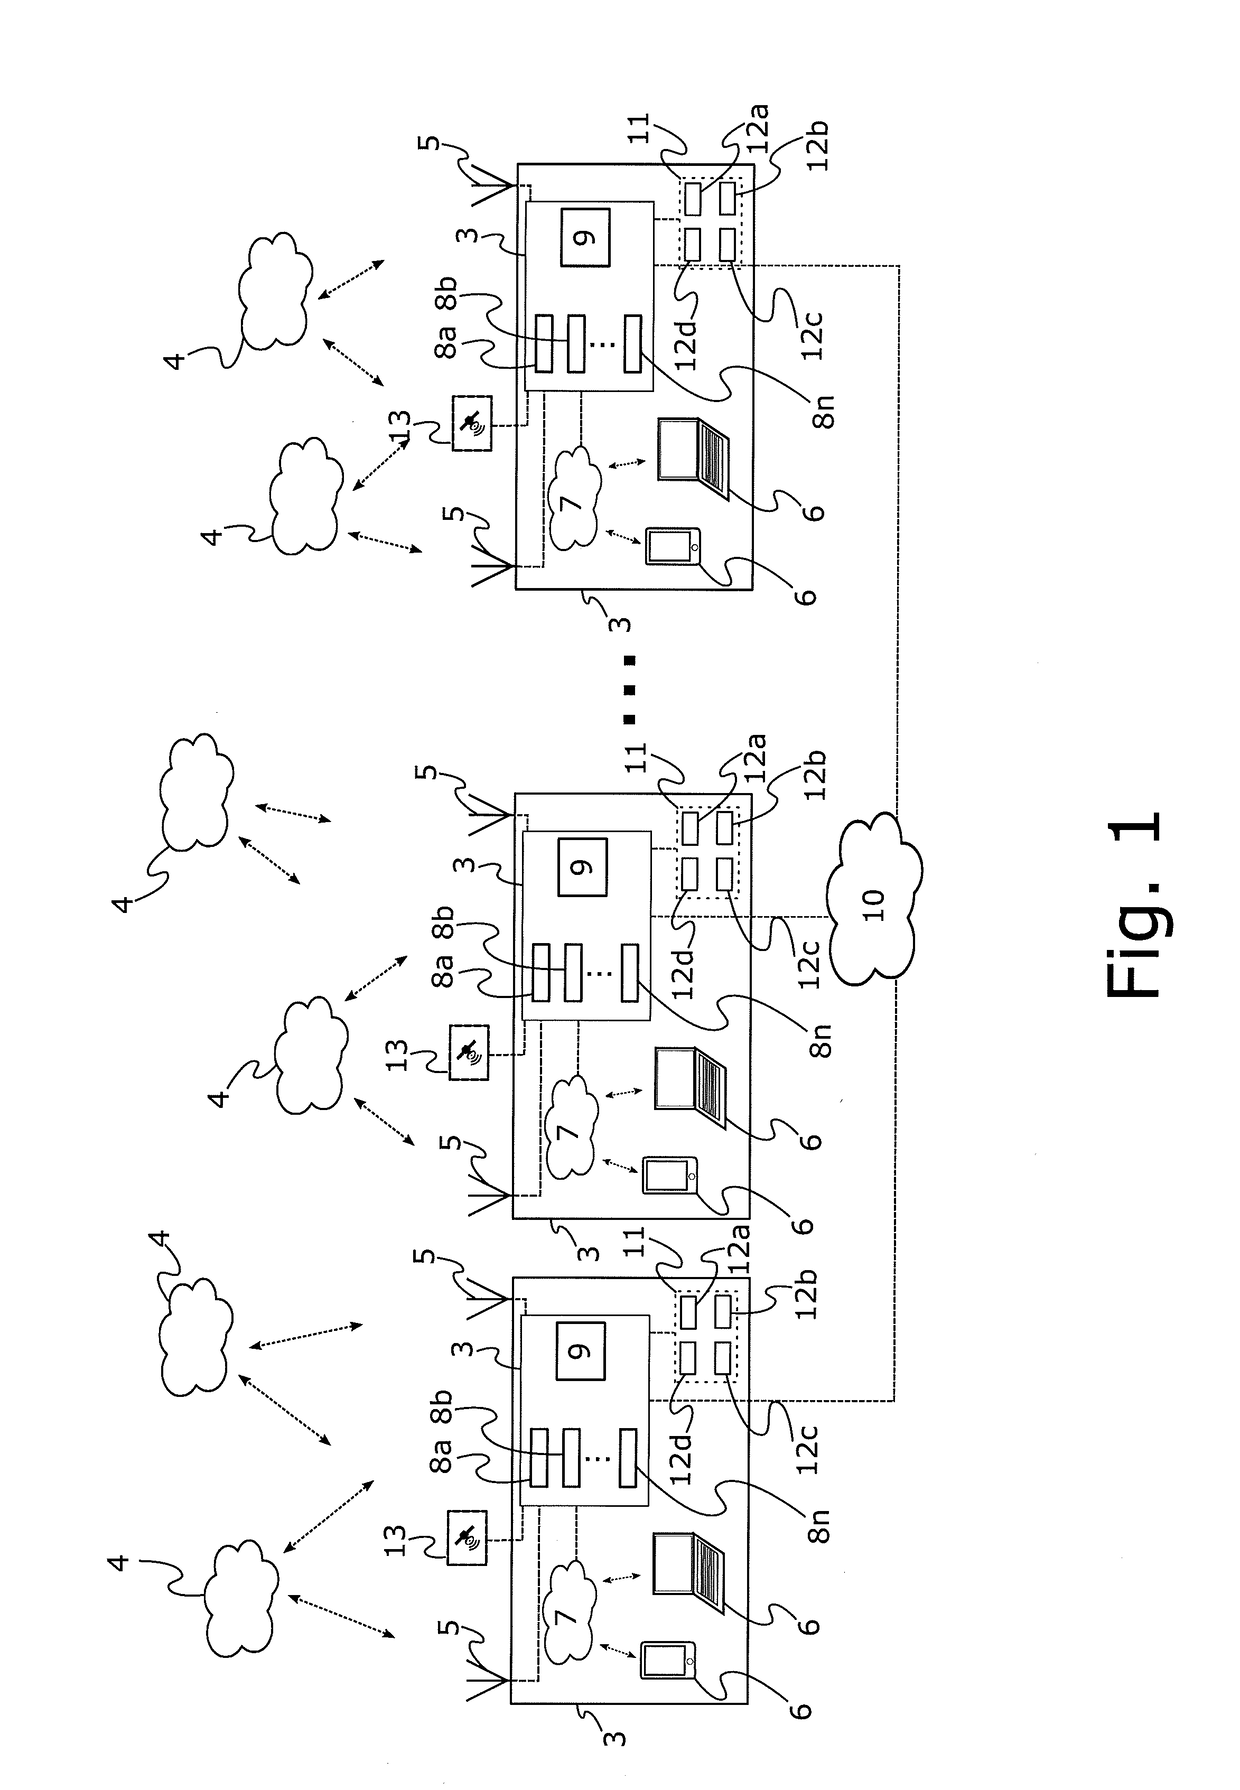 Distributed wireless communication system for moving vehicles